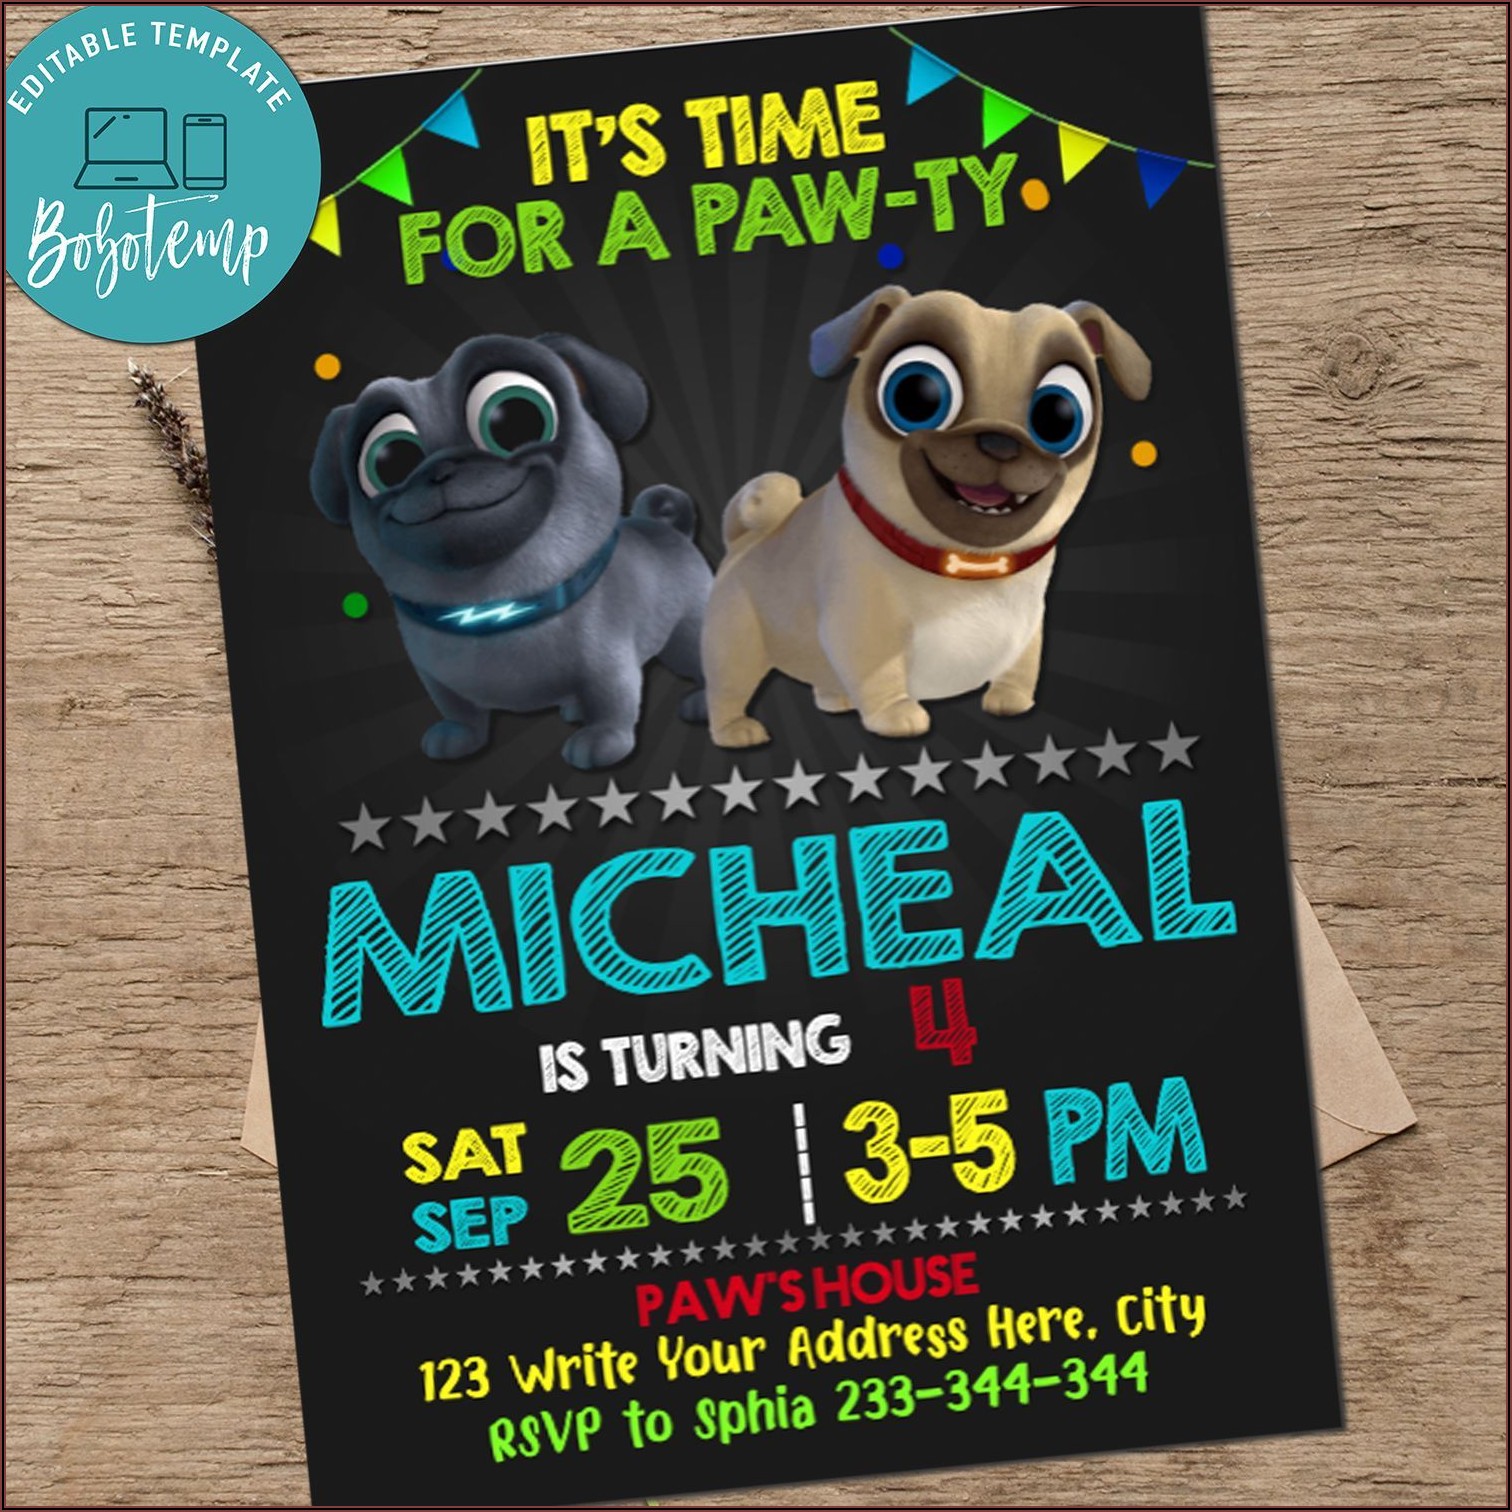 Free Downloadable Puppy Dog Pals Invitations